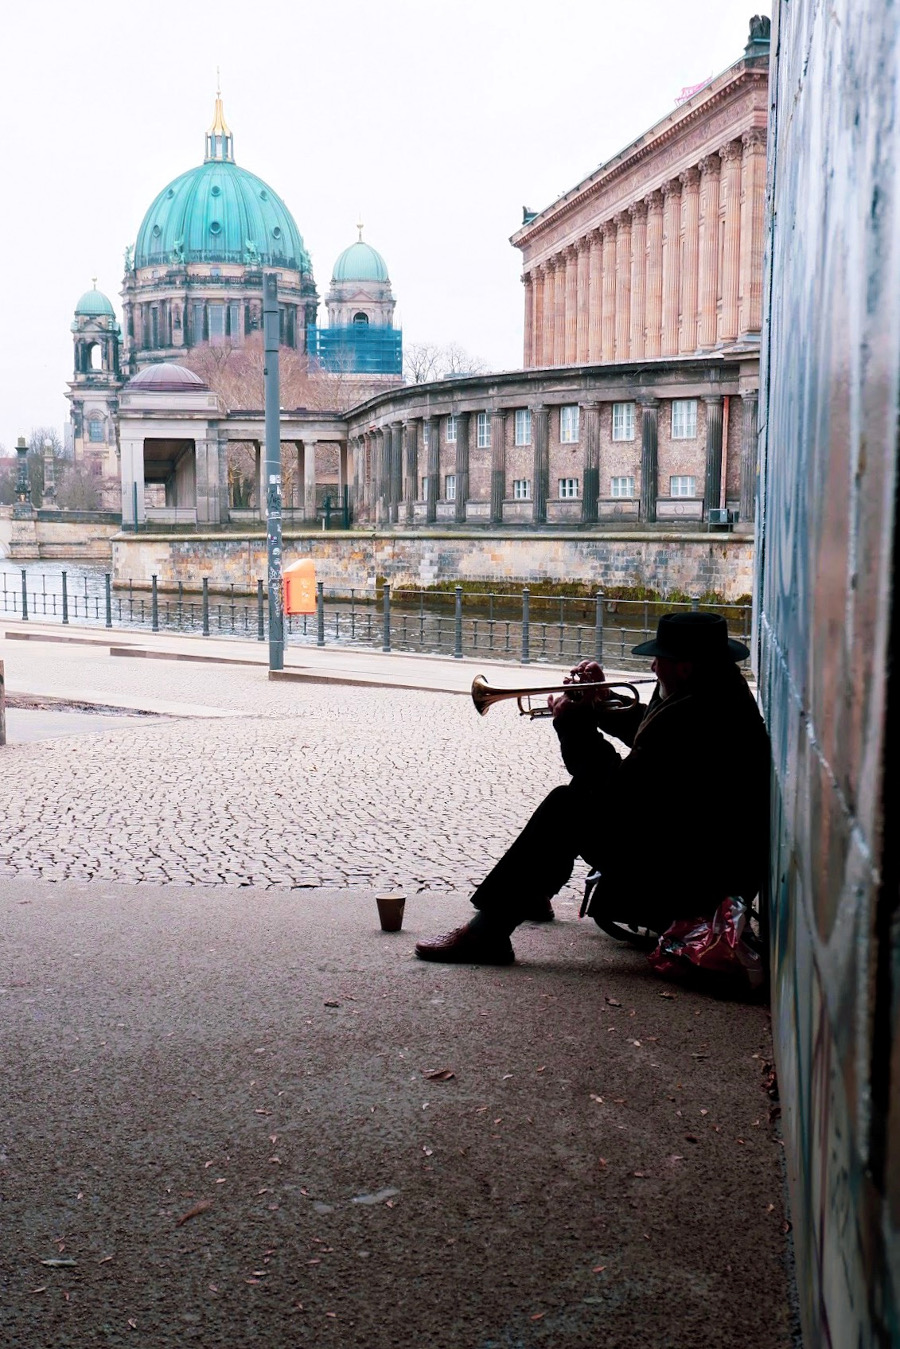 A visit to Berlin is a musical journey